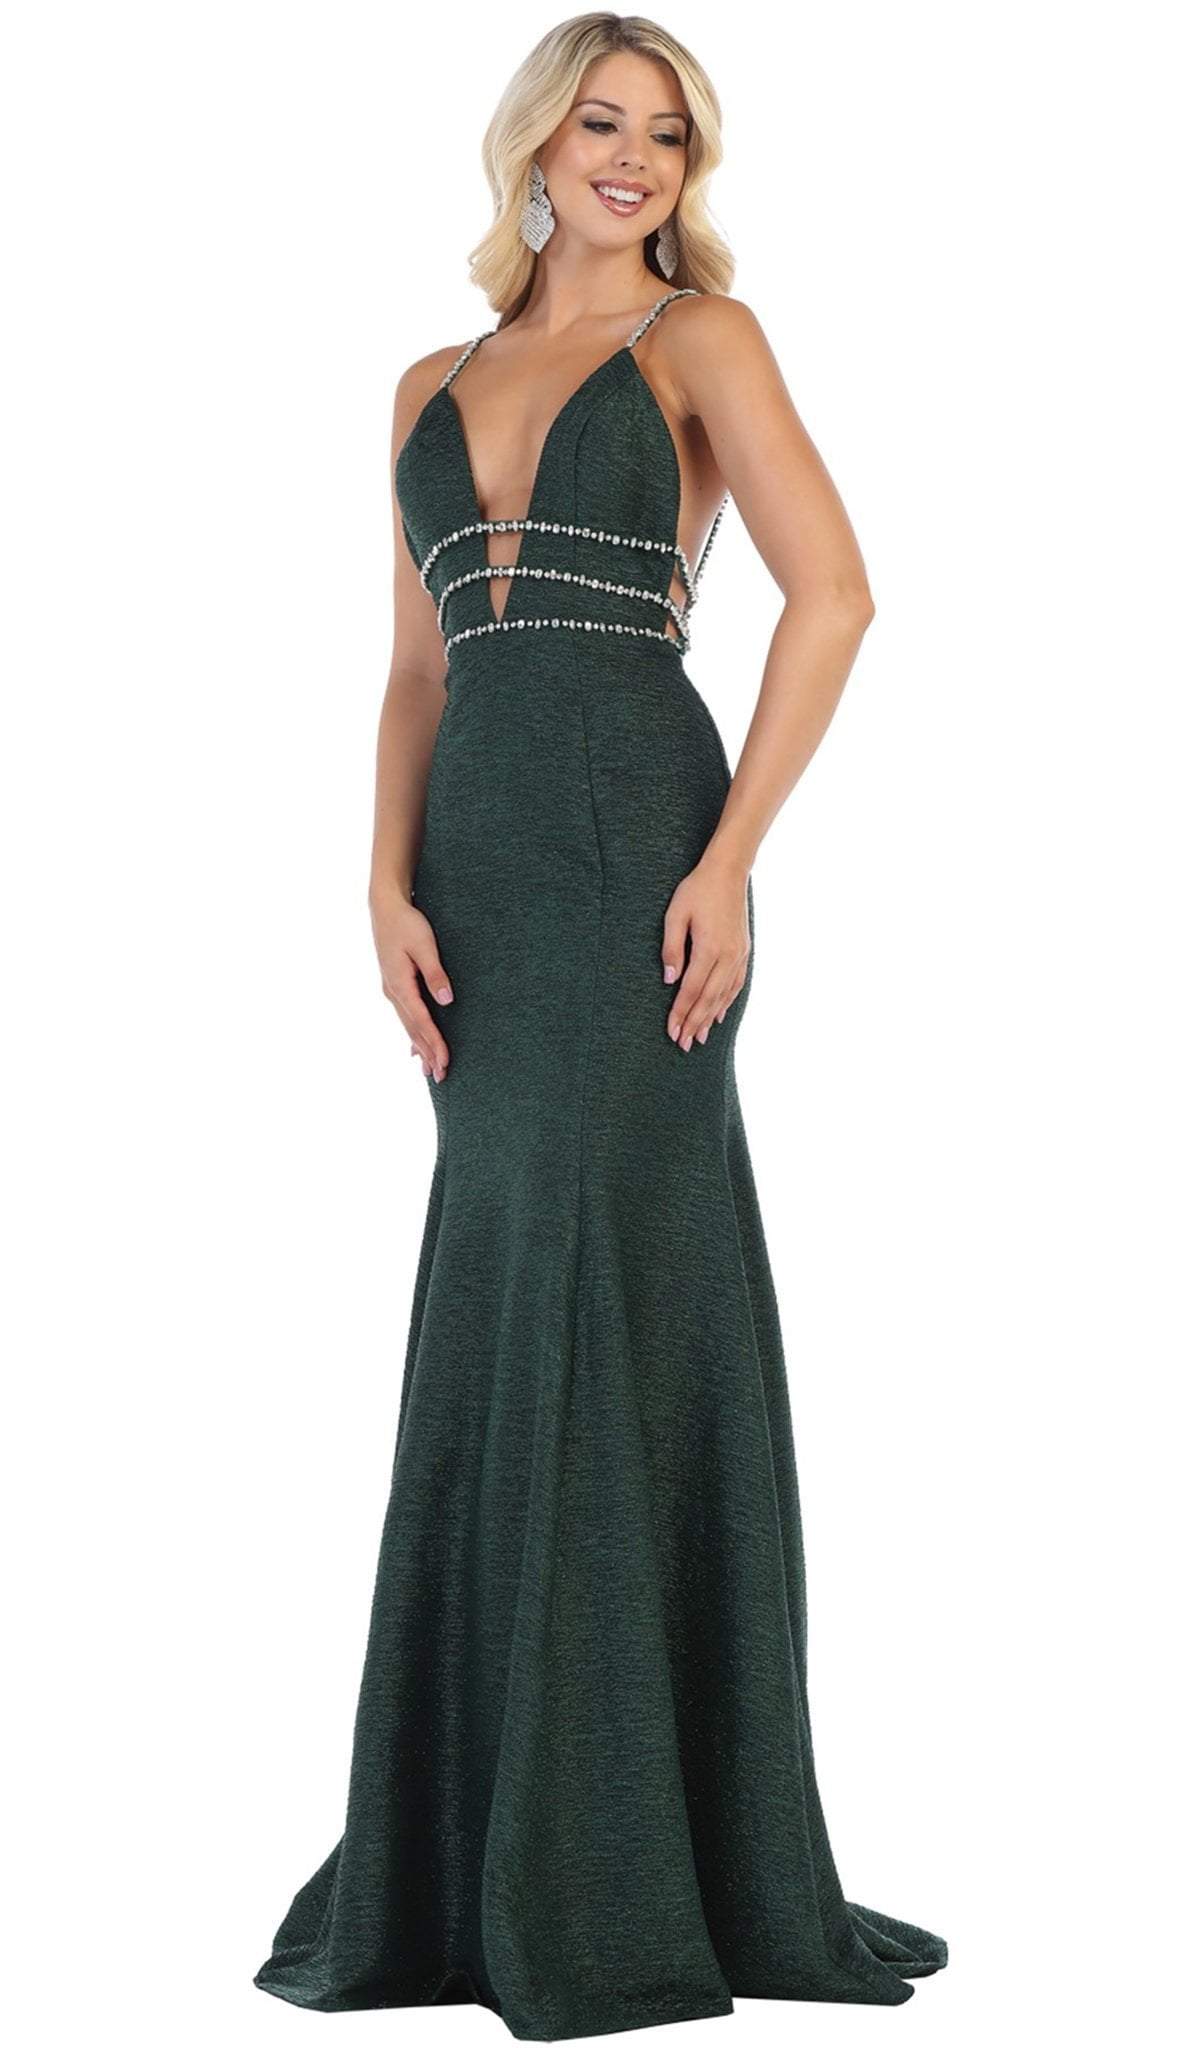 May Queen - RQ7638 Crystalline Tri-Band Plunging Trumpet Gown Special Occasion Dress 2 / Hunter Green